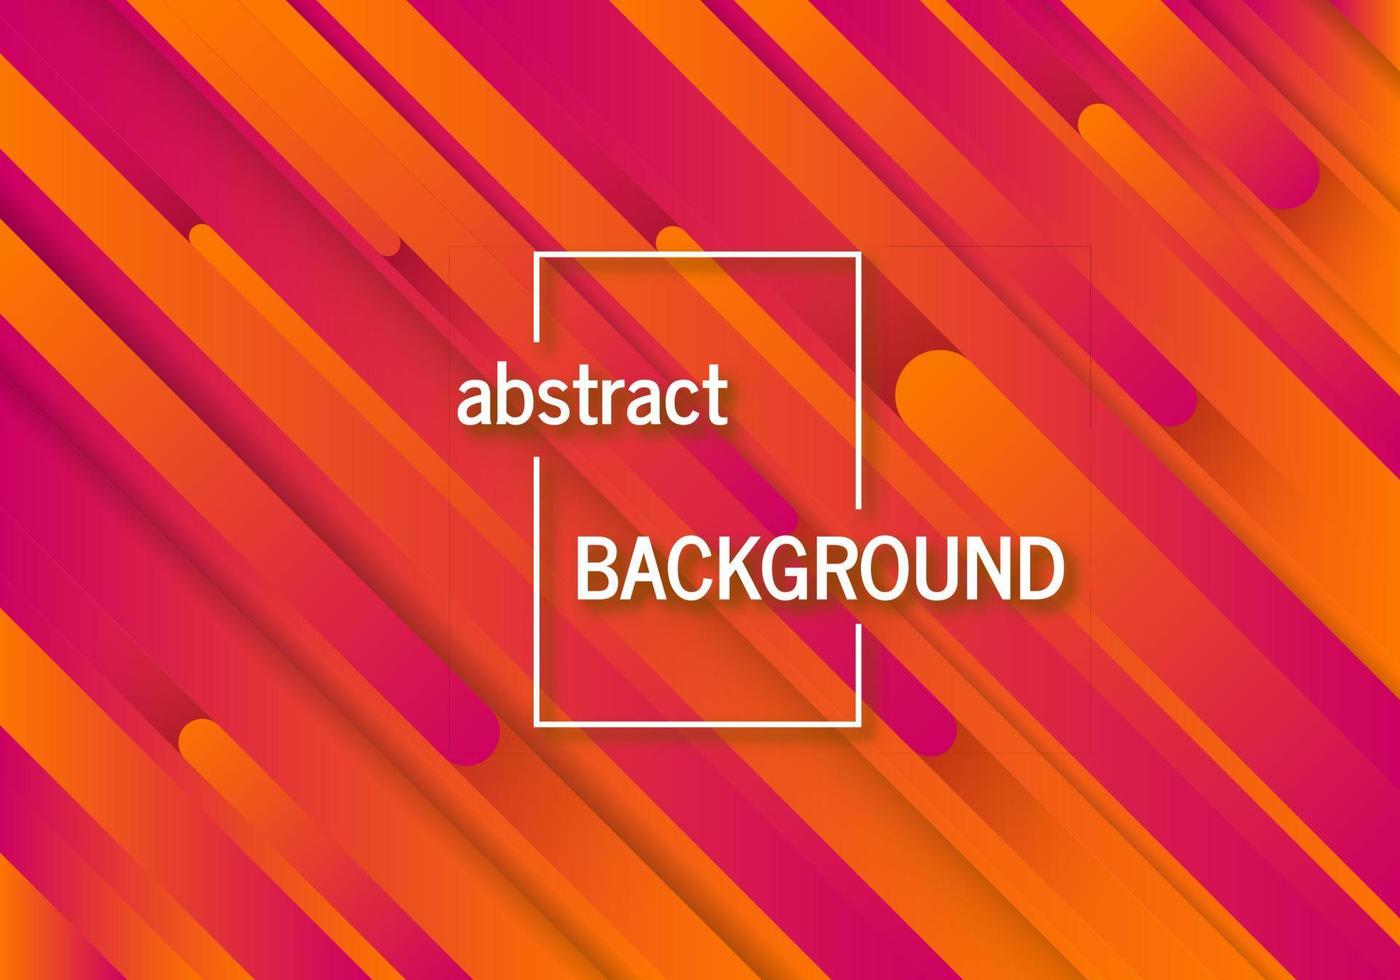 Geometric orange background with abstract lines vector